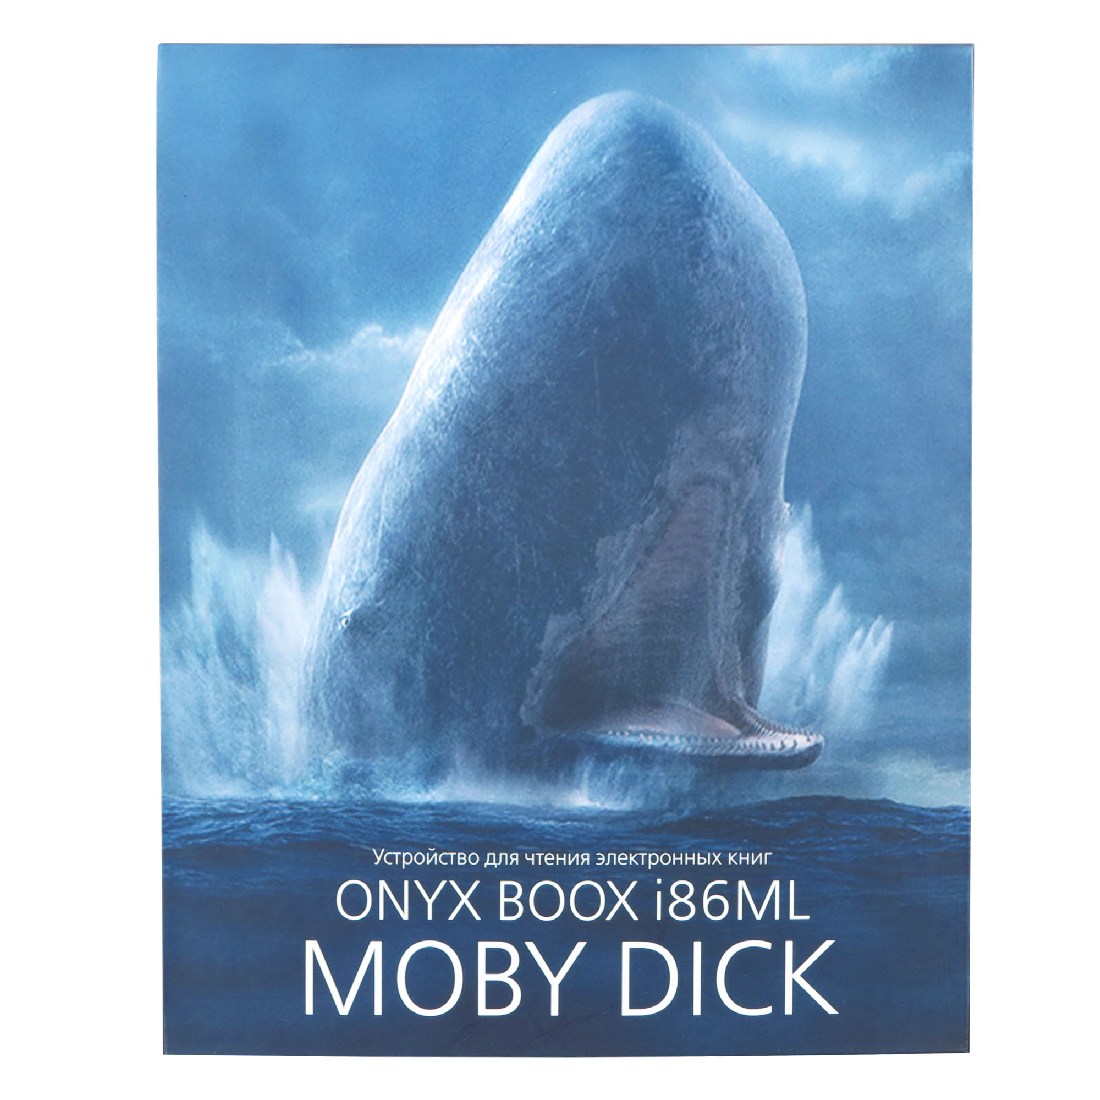 Moby dick stern